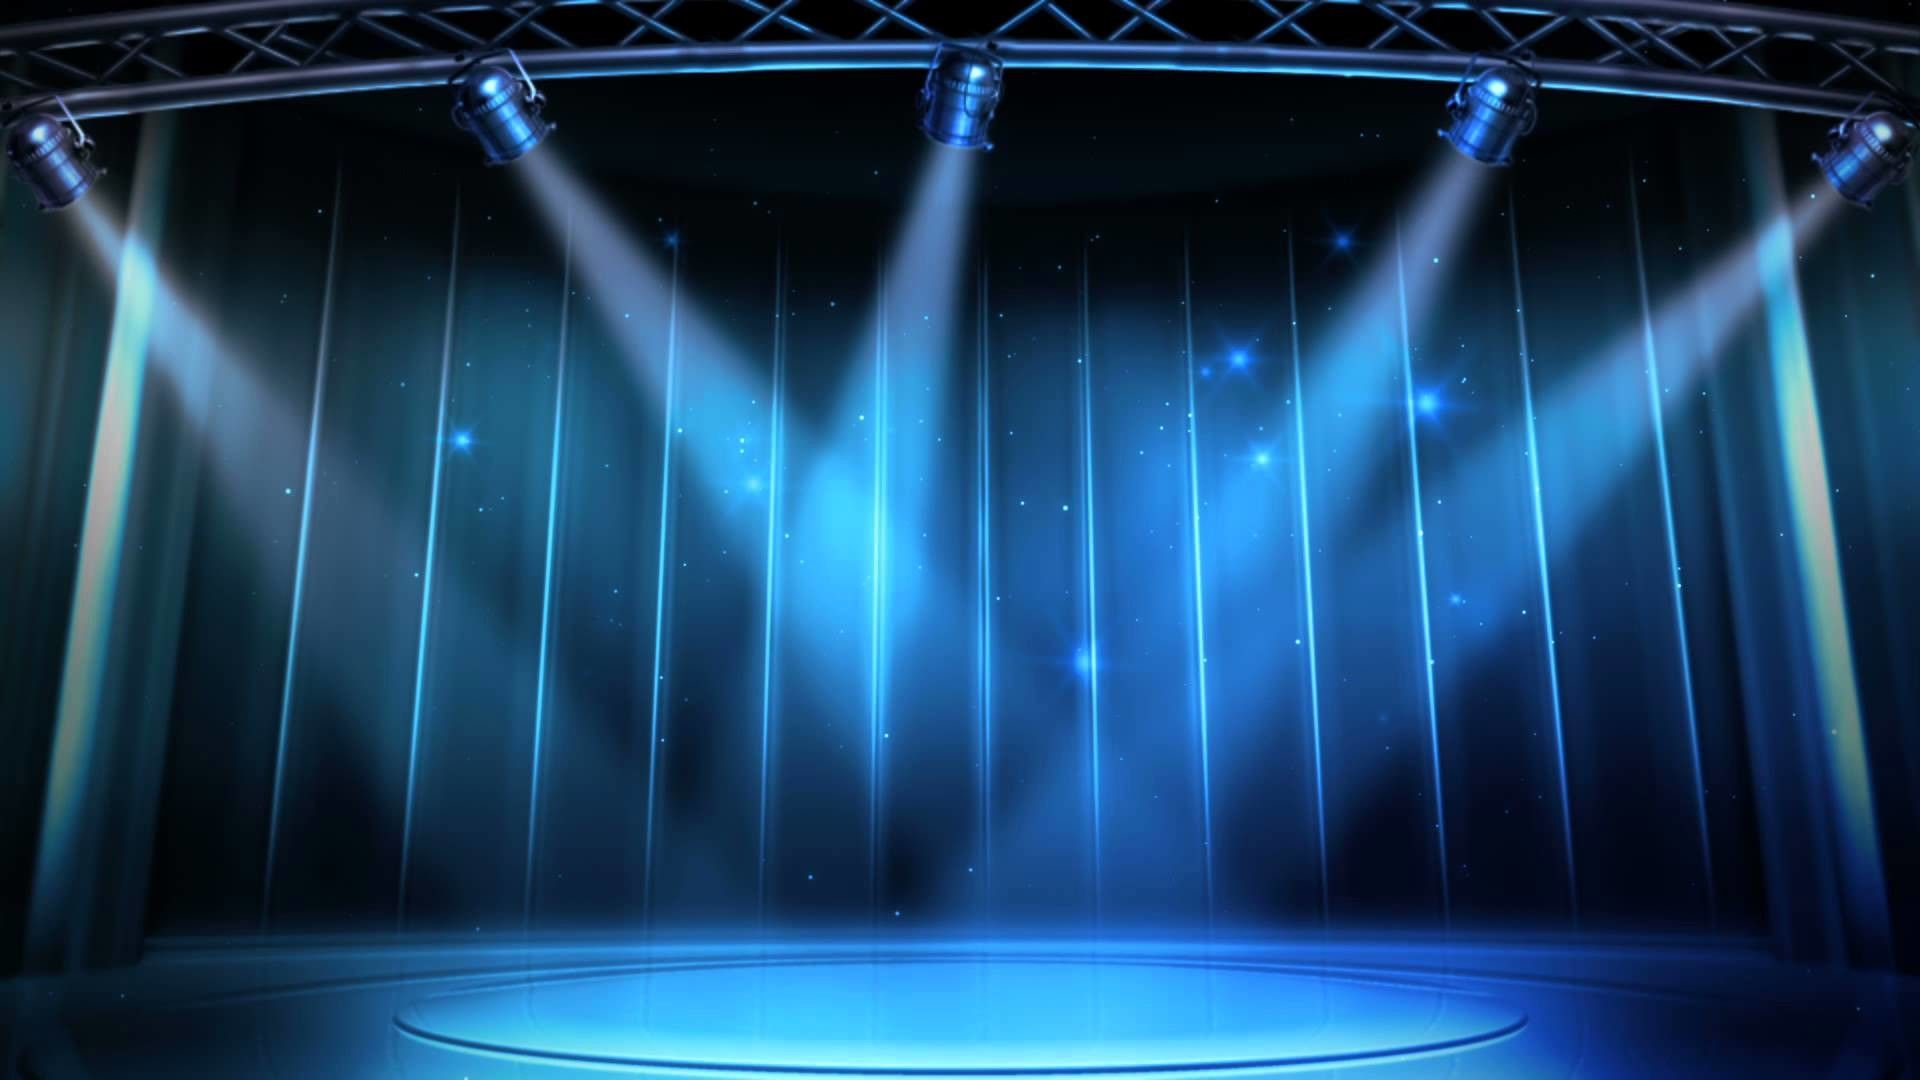 Amazing 150 Background anime stage for phone and desktop